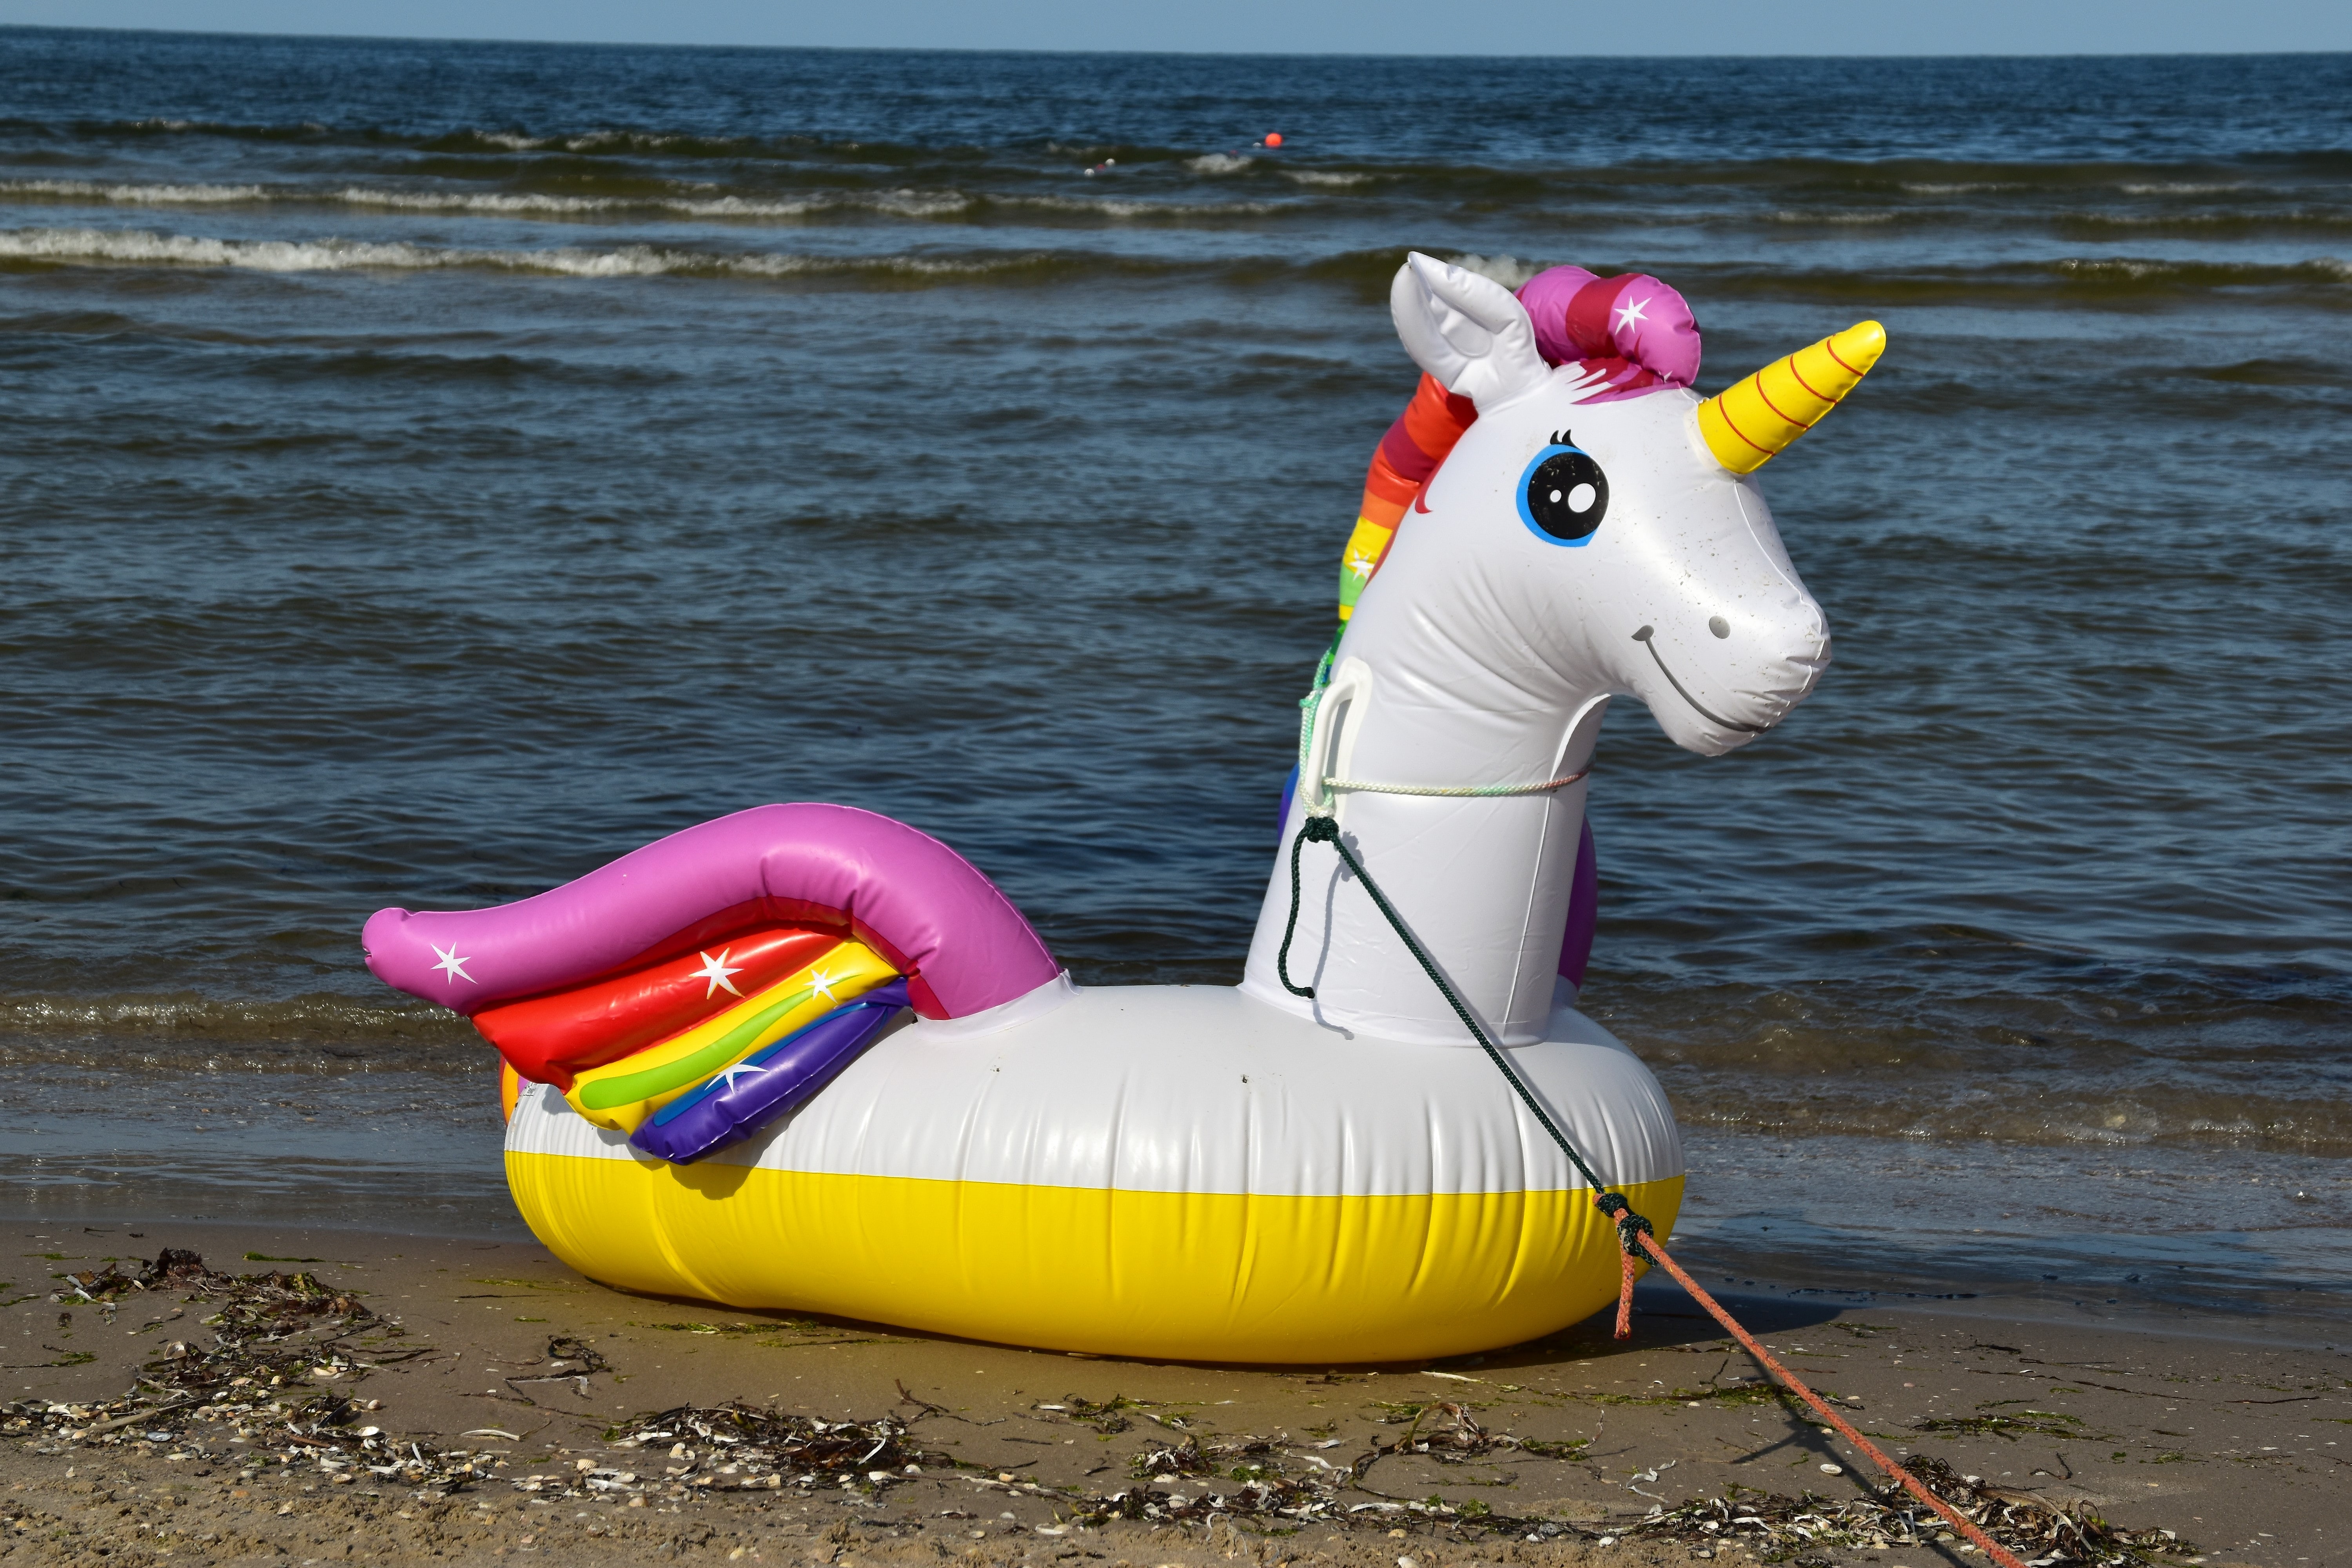 Large inflatable unicorn at water's edge